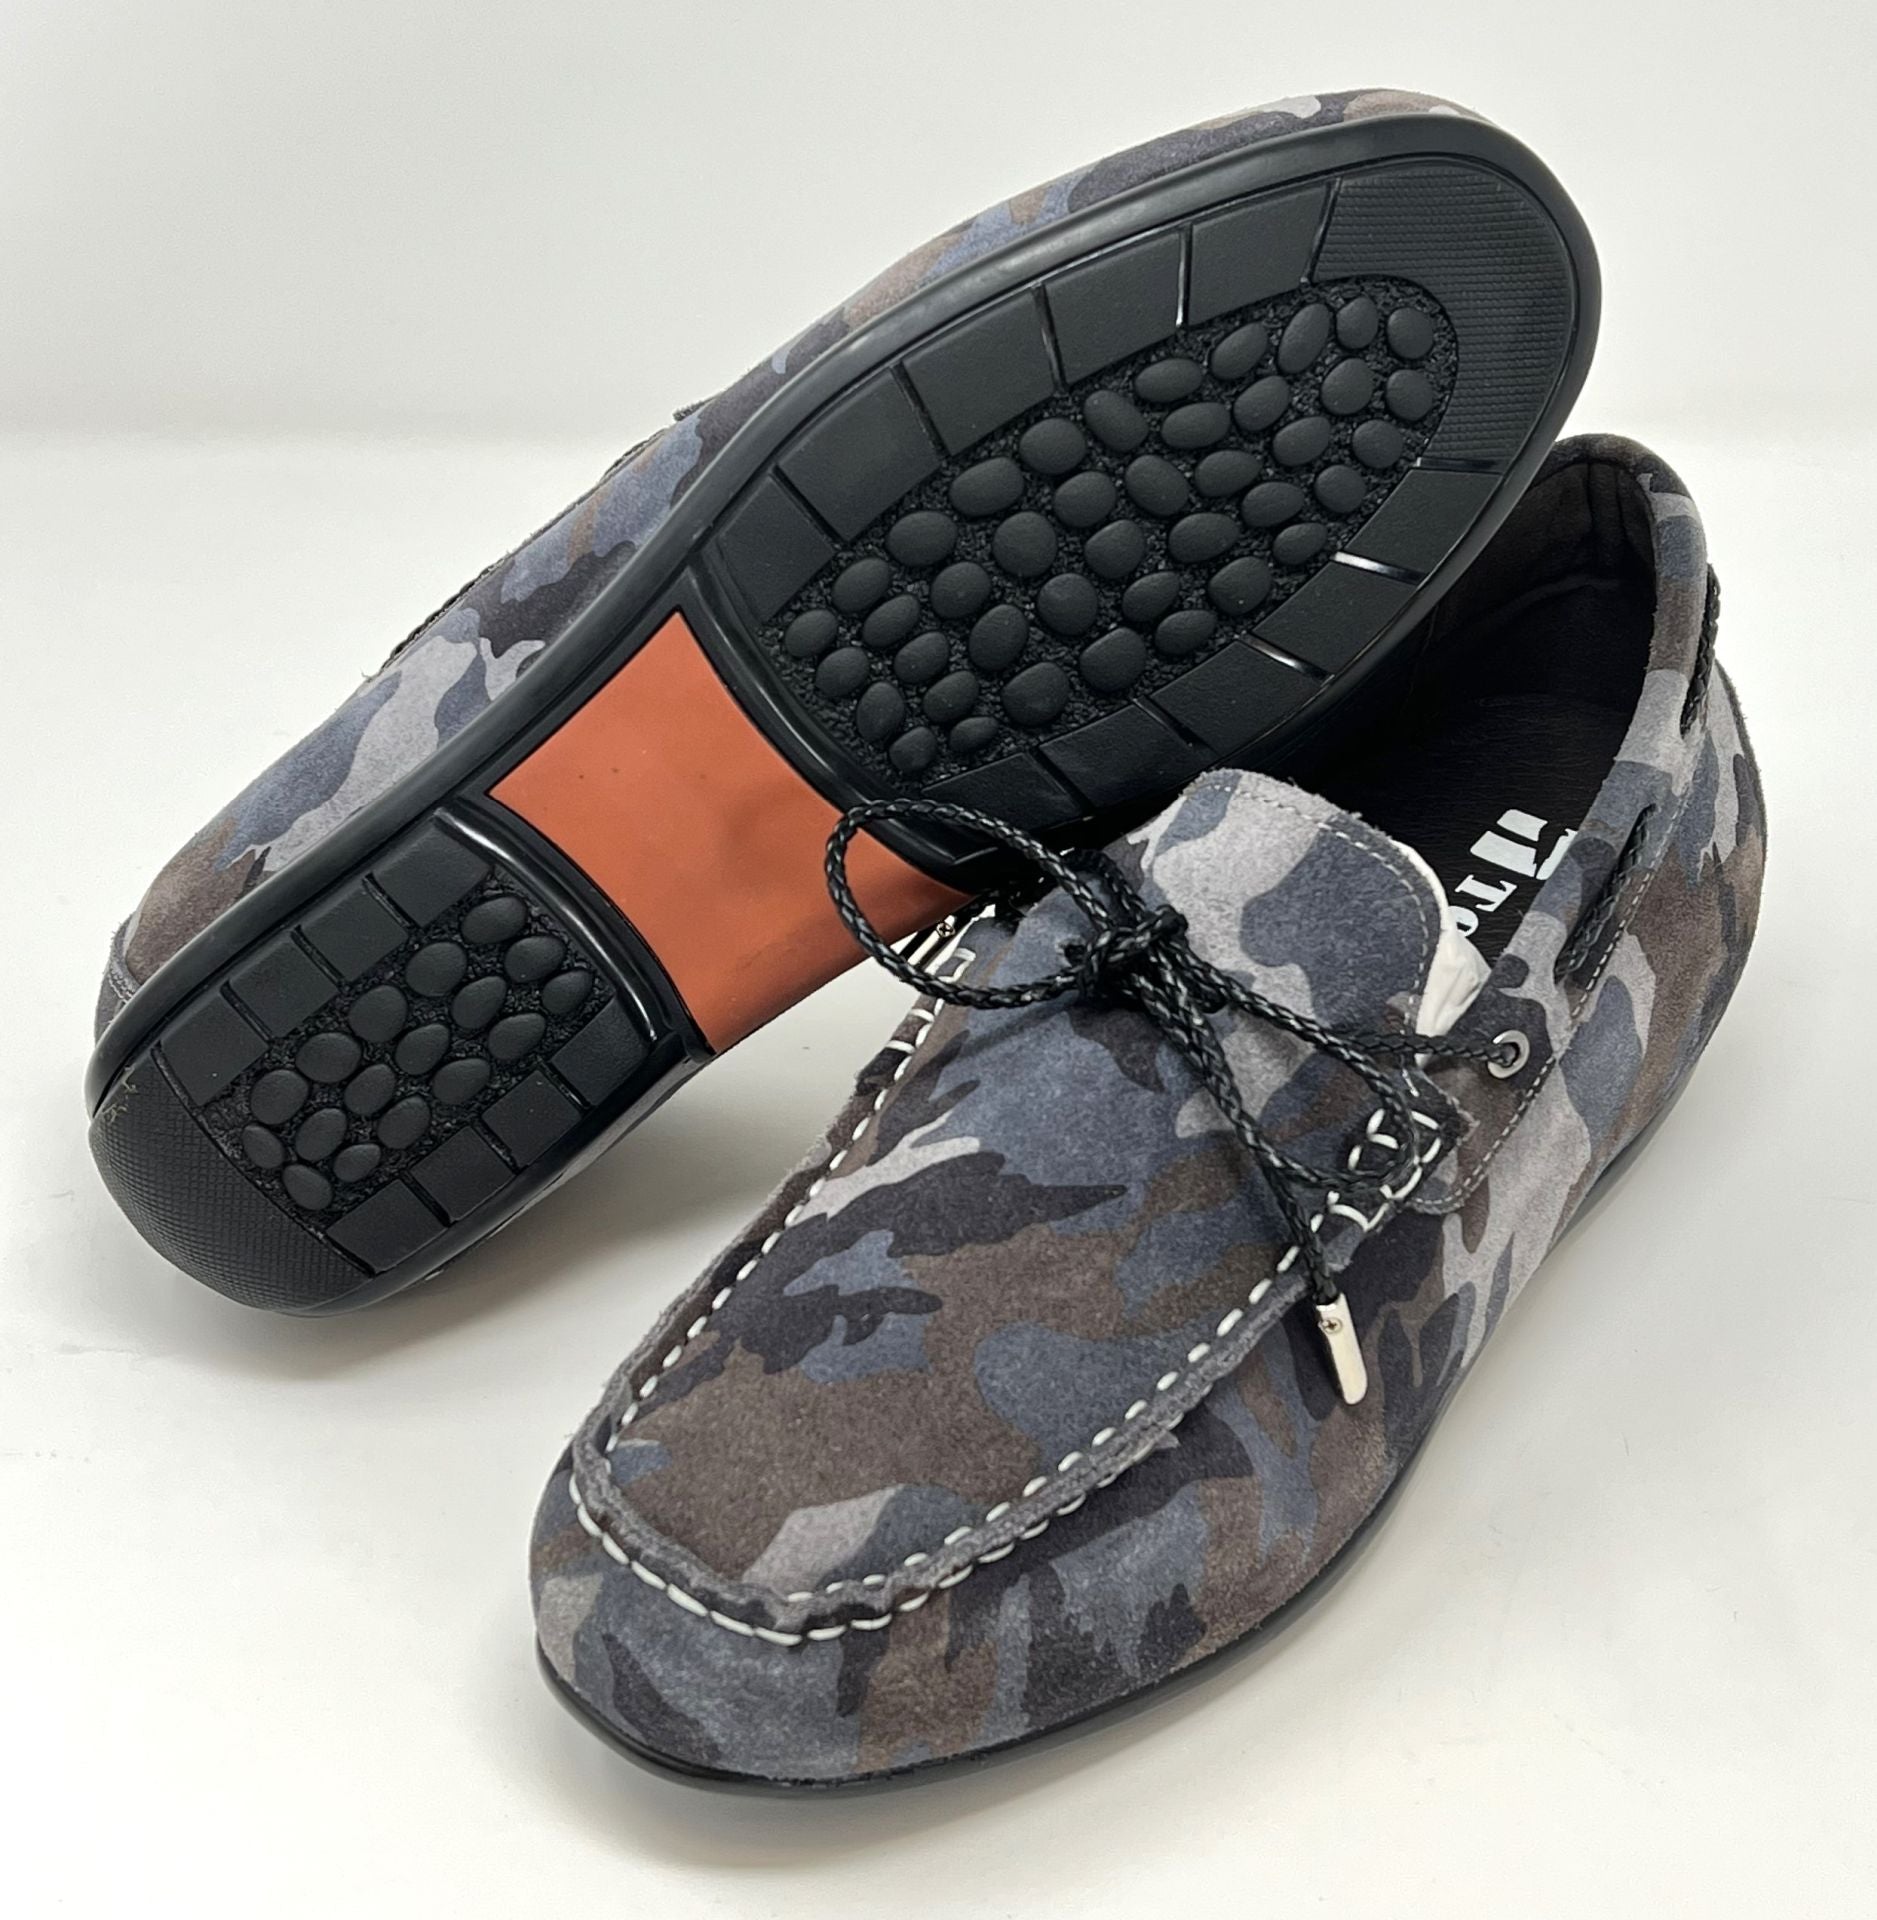 Elevator shoes height increase FSC0103 - 2.4 Inches Taller (Camo Grey) - Size 7.5 Only